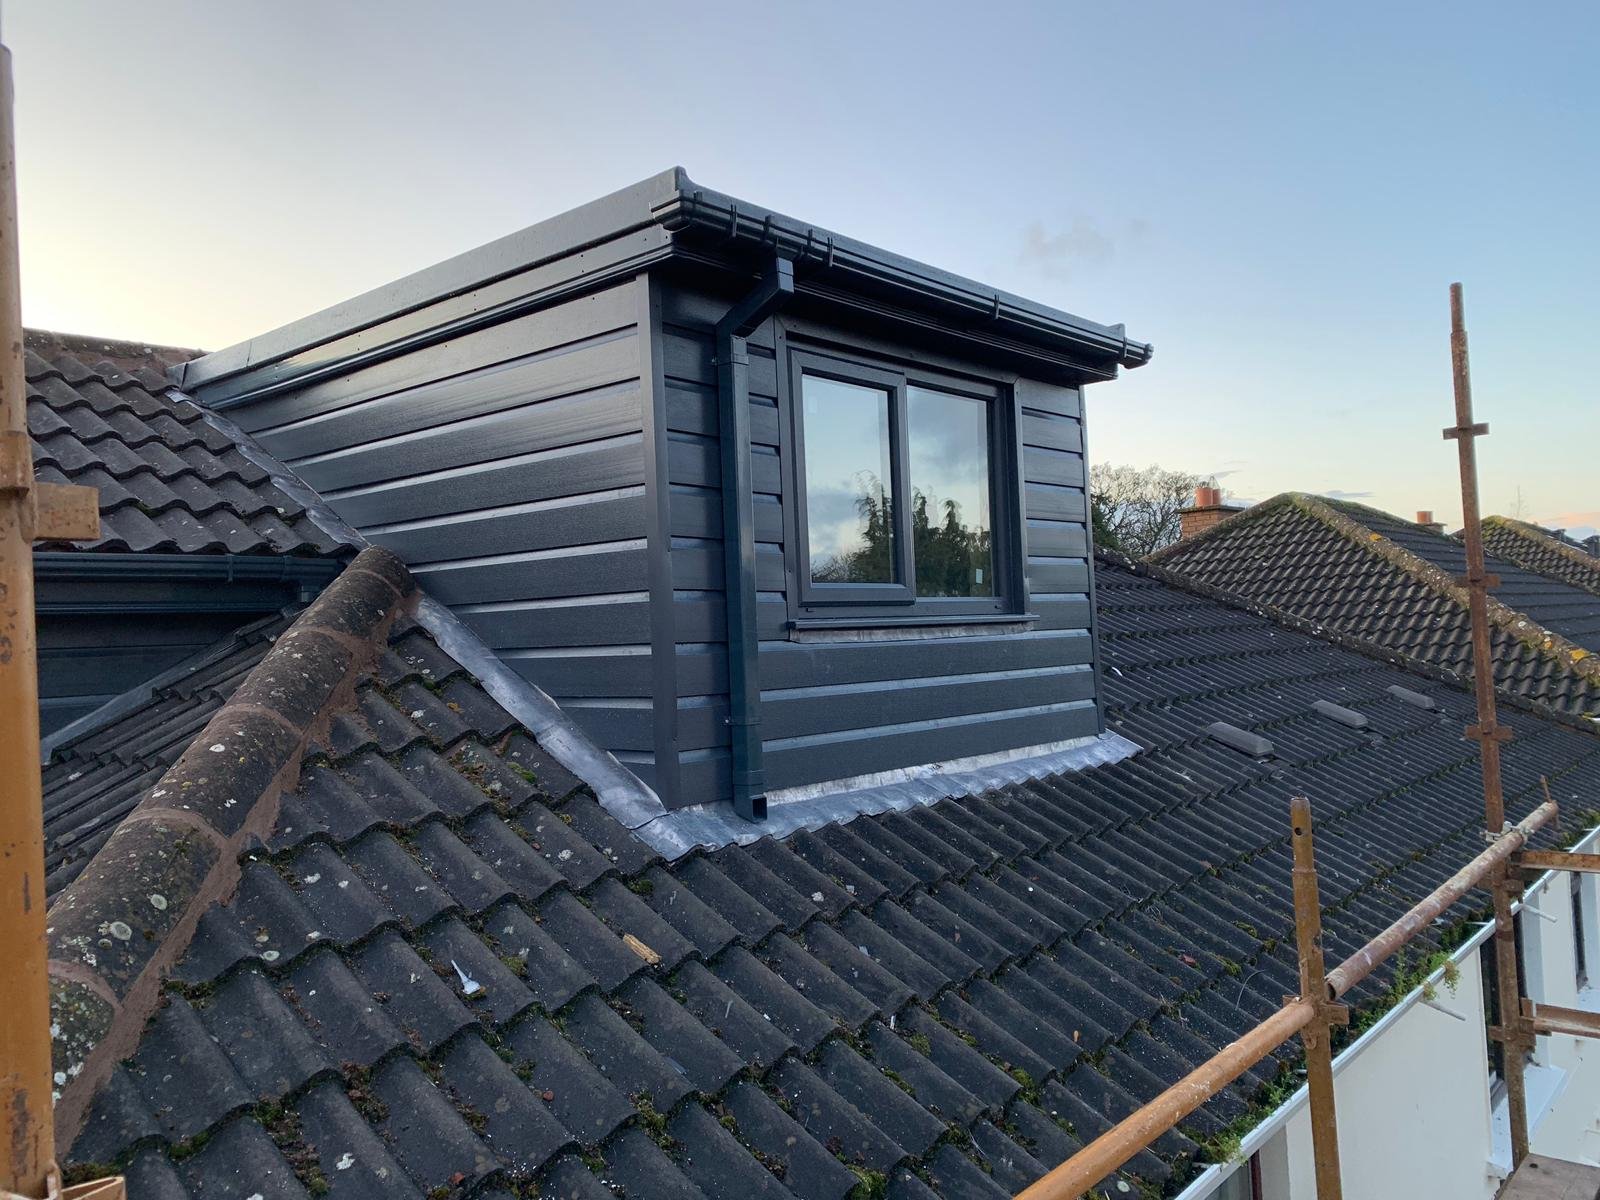 Hire Dublin’s Trusted Attic Conversion Specialists for Your Next Project